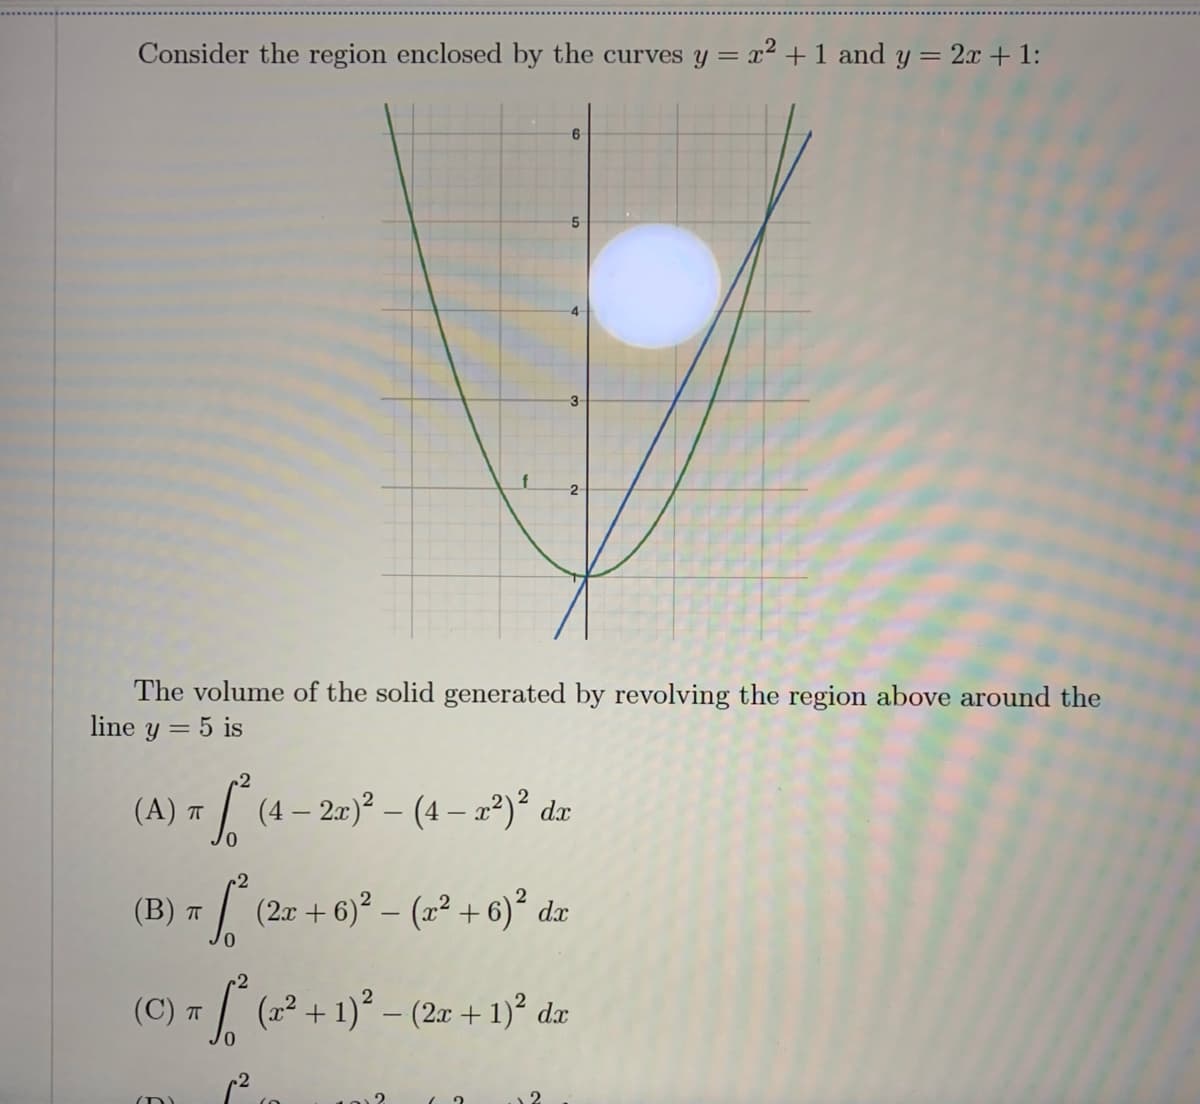 Consider the region enclosed by the curves y = x² + 1 and y = 2.x + 1:
5.
2
The volume of the solid generated by revolving the region above around the
line y = 5 is
(A) = / (4- 2)° - (4 - a*)° dz
(B) т
(2r + 6)? – (x² + 6)² dx
(C) T (22 + 1)° – (2x + 1)² dx
(D)
